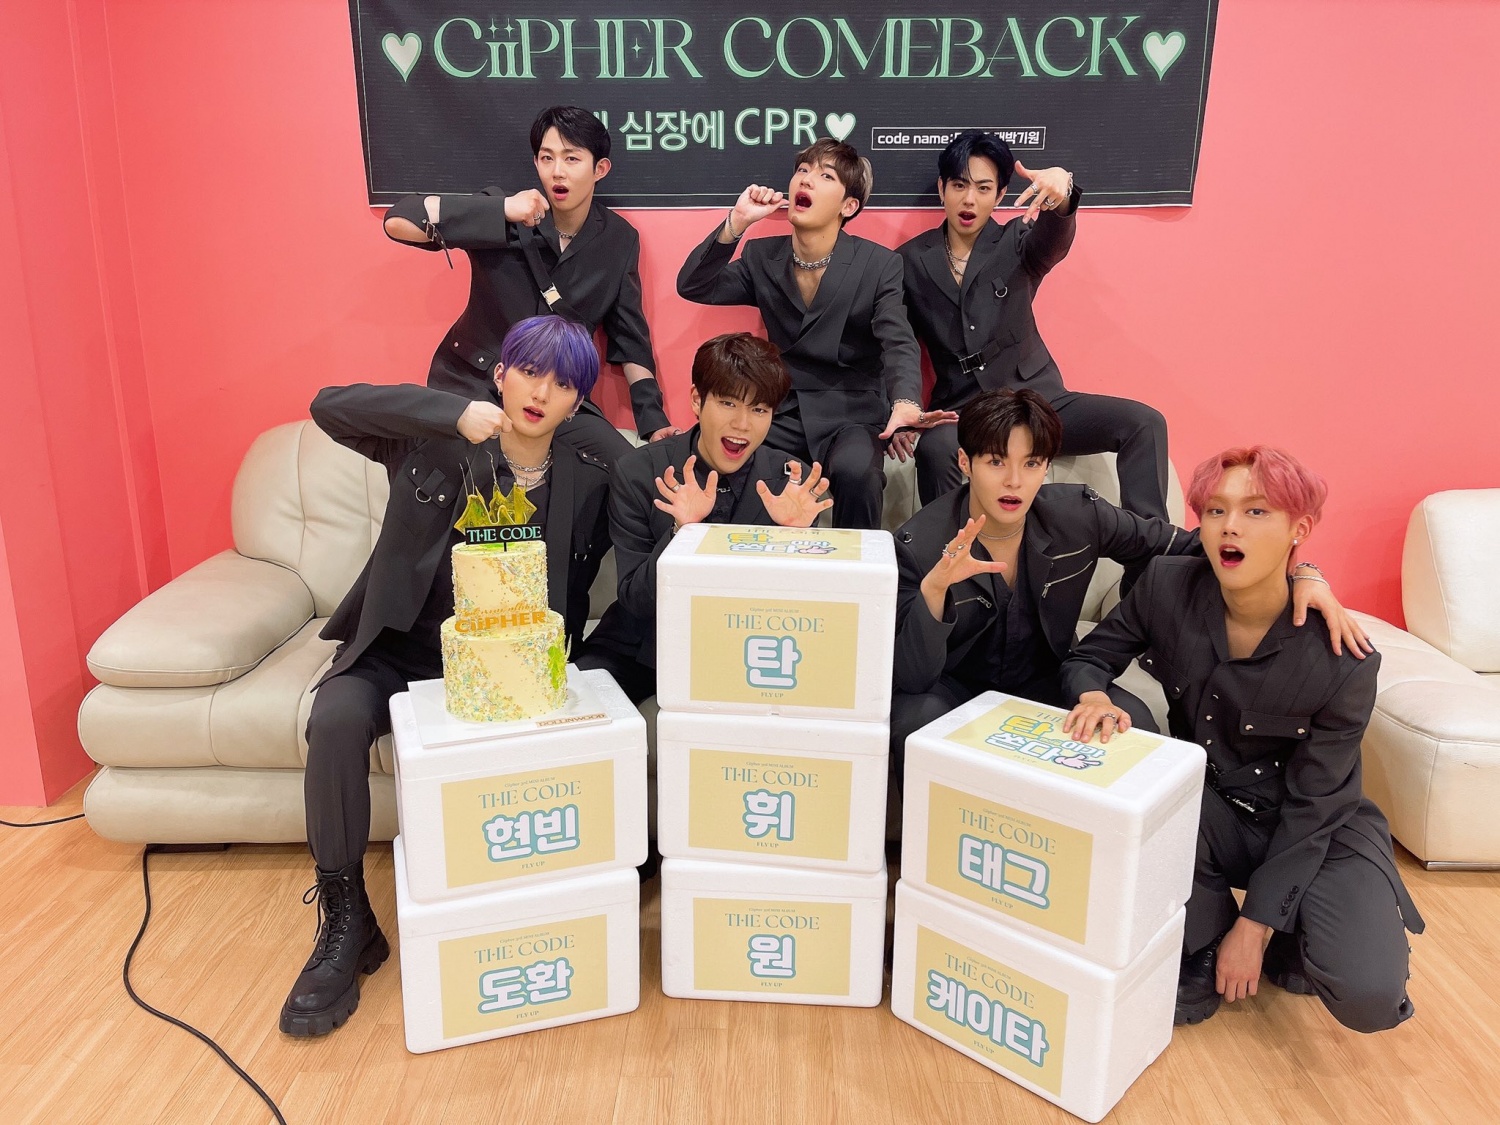 Ciipher, strong performance + comeback with self-confidence